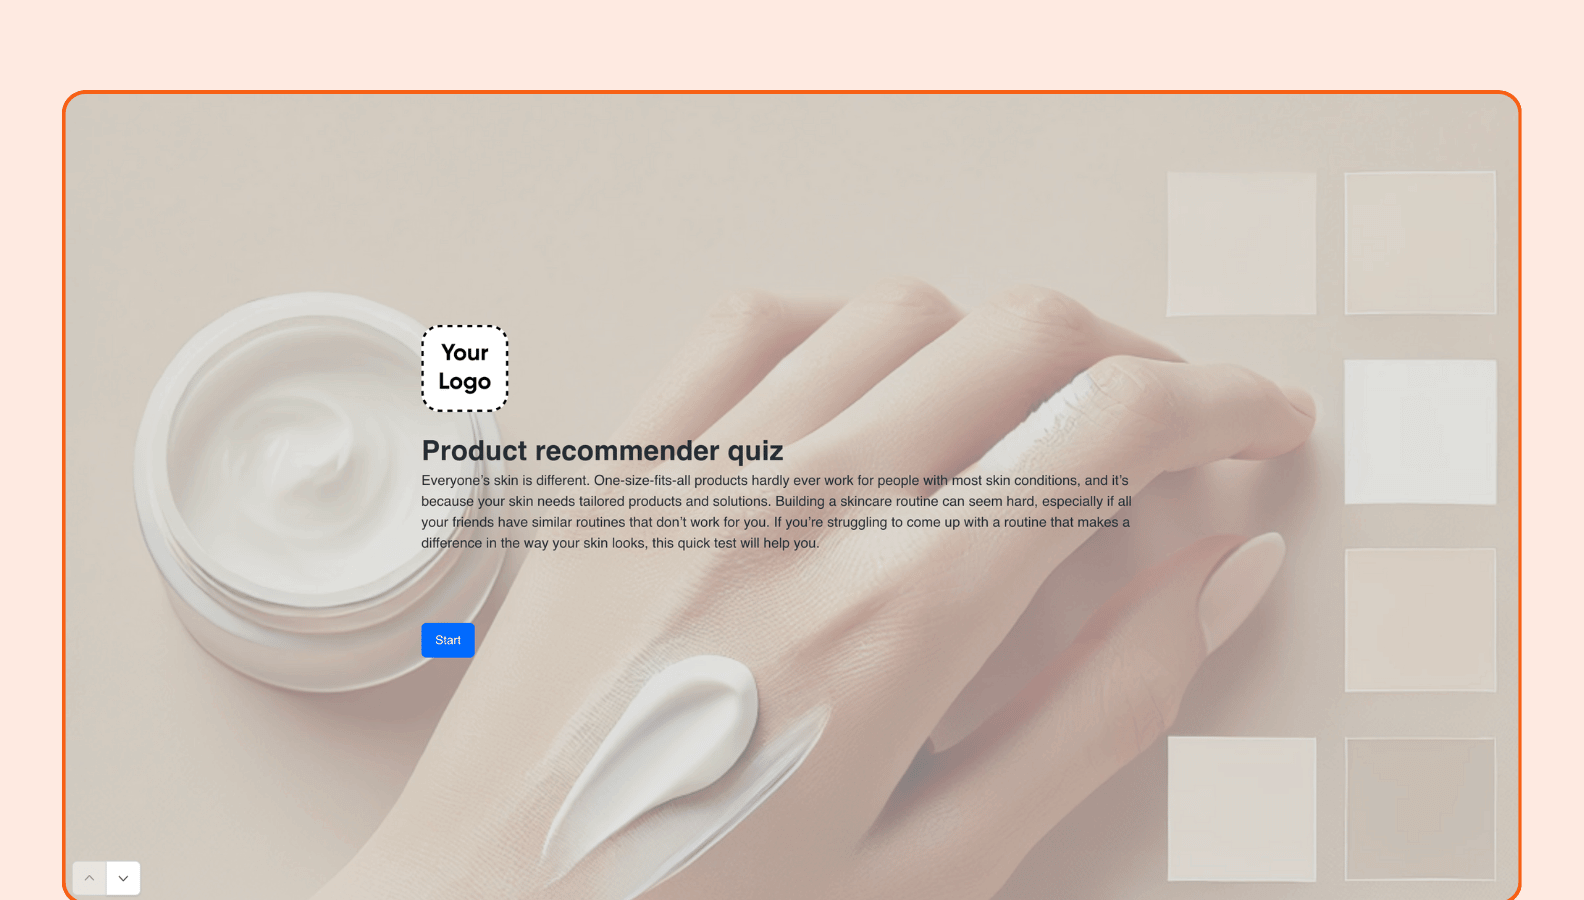 Product recommender quiz